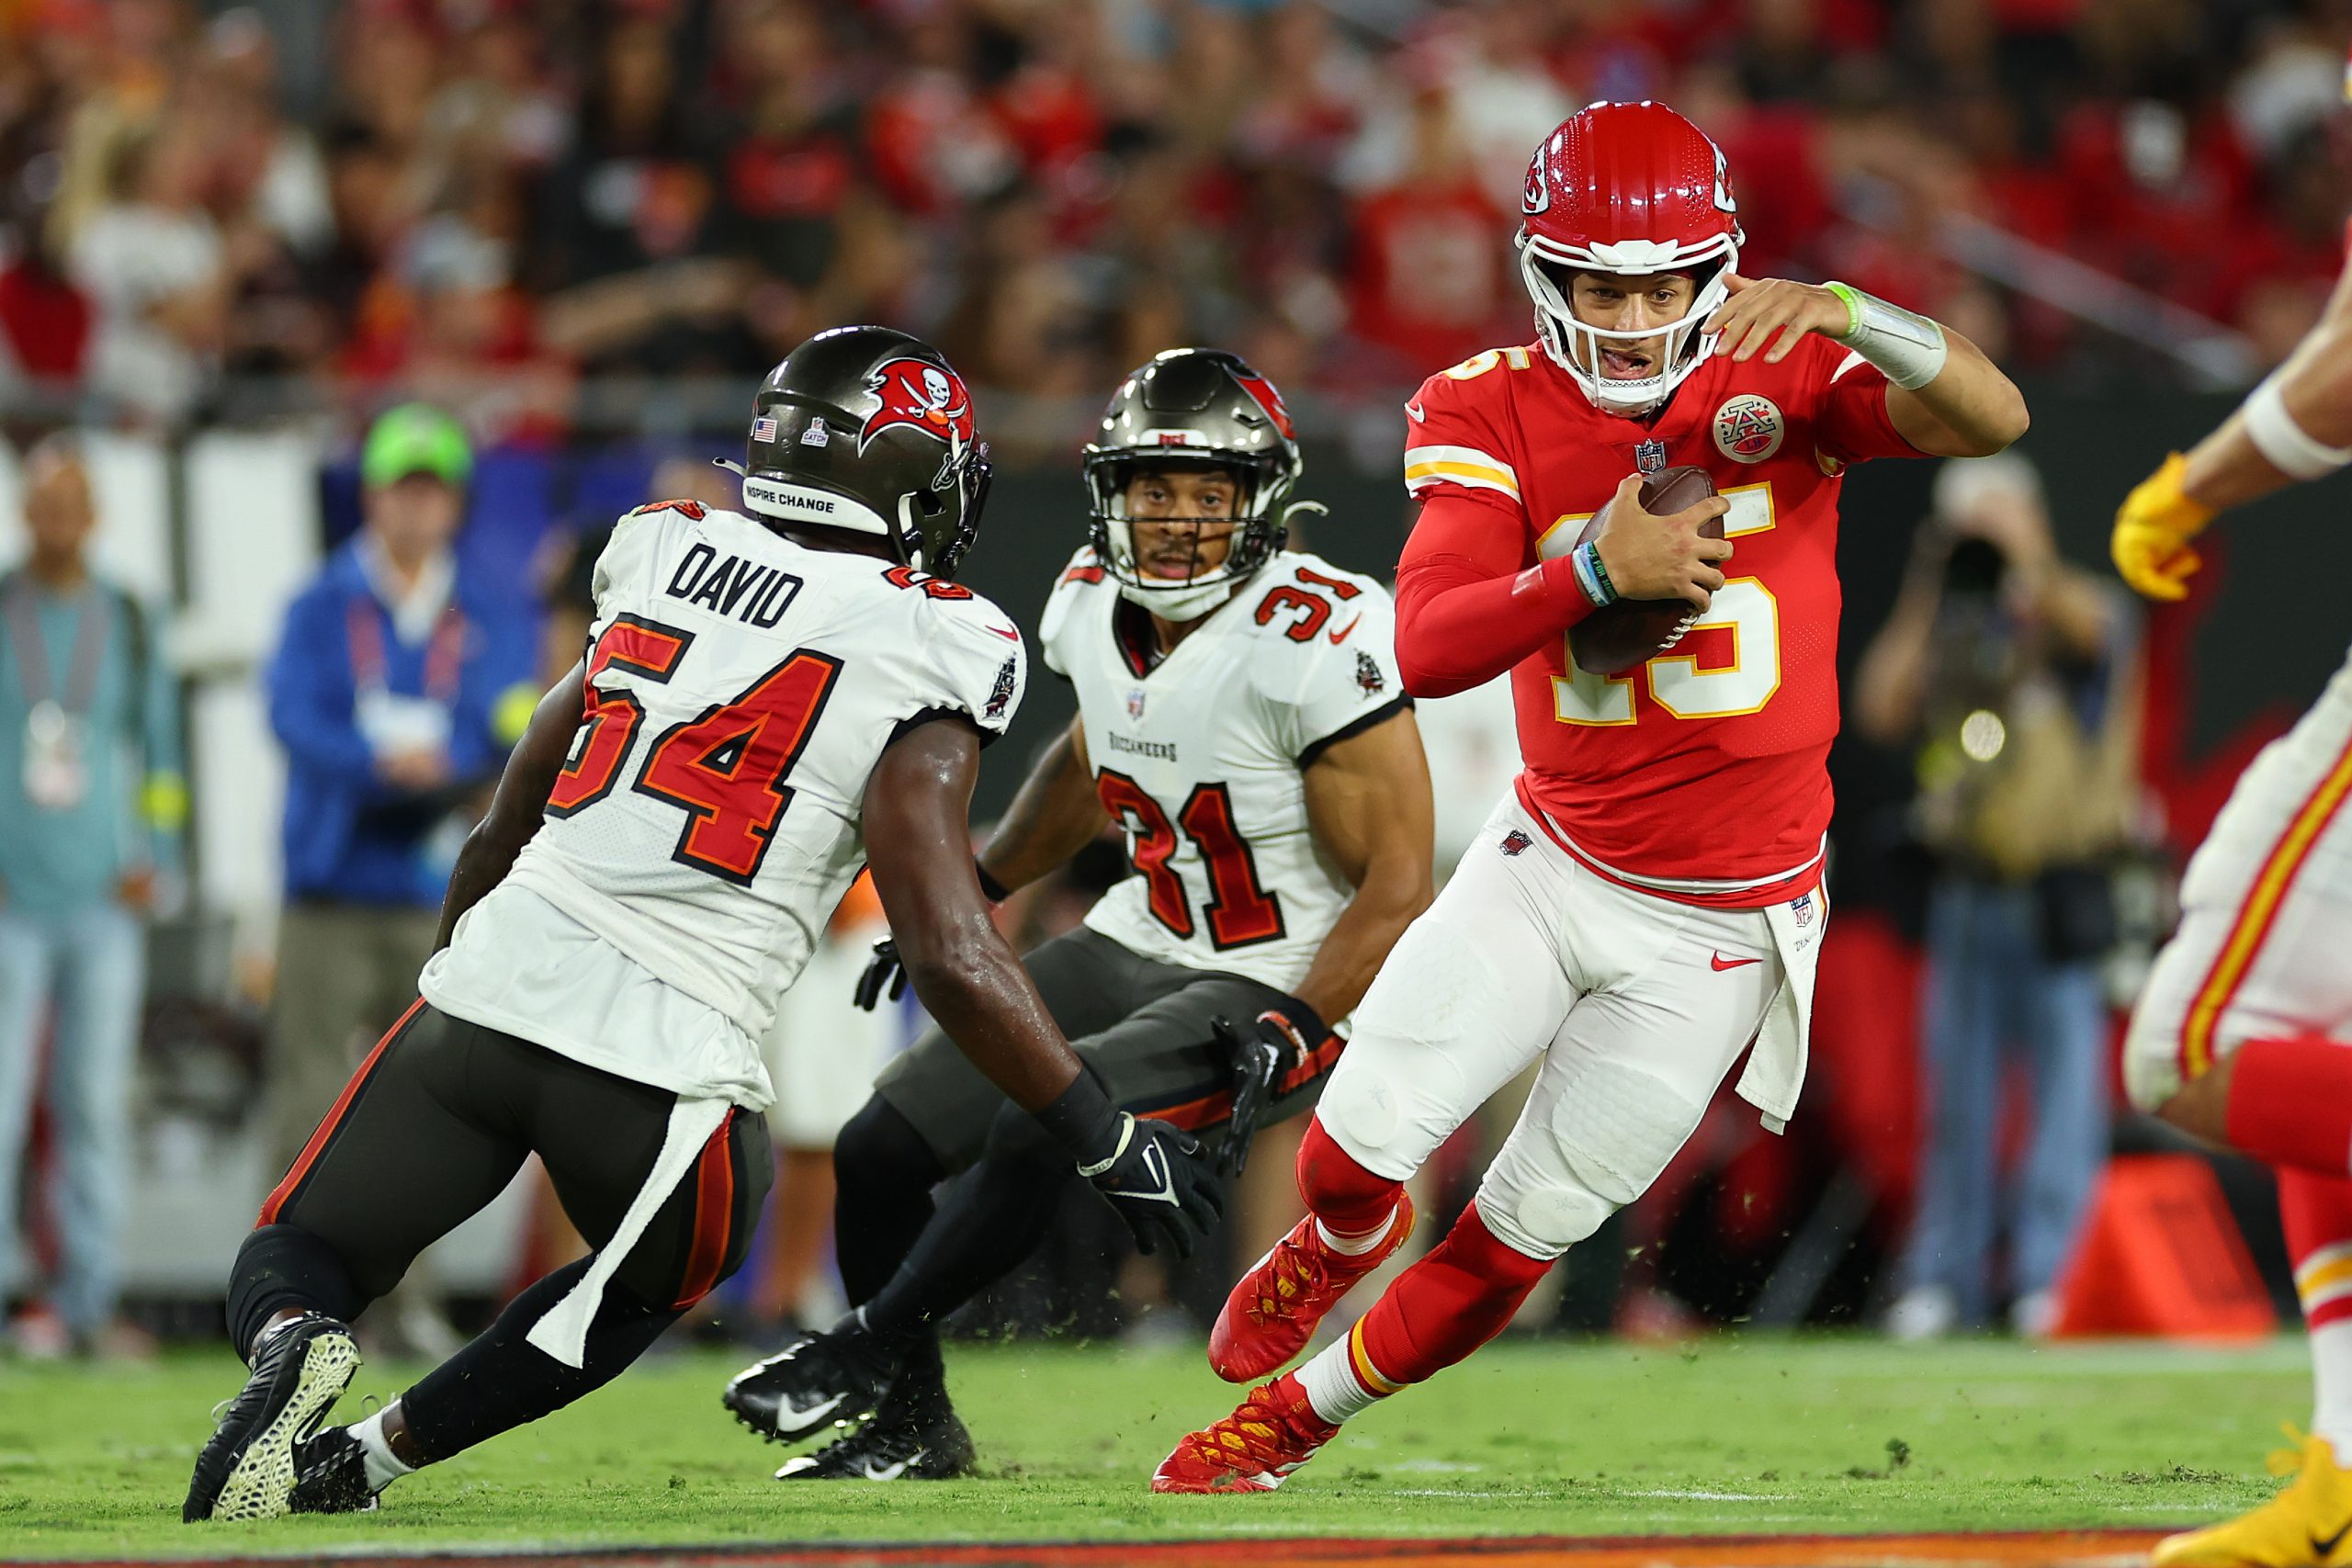 Patrick Mahomes #15 of the Kansas City Chiefs runs with the ball against Lavonte David #54 of the T...